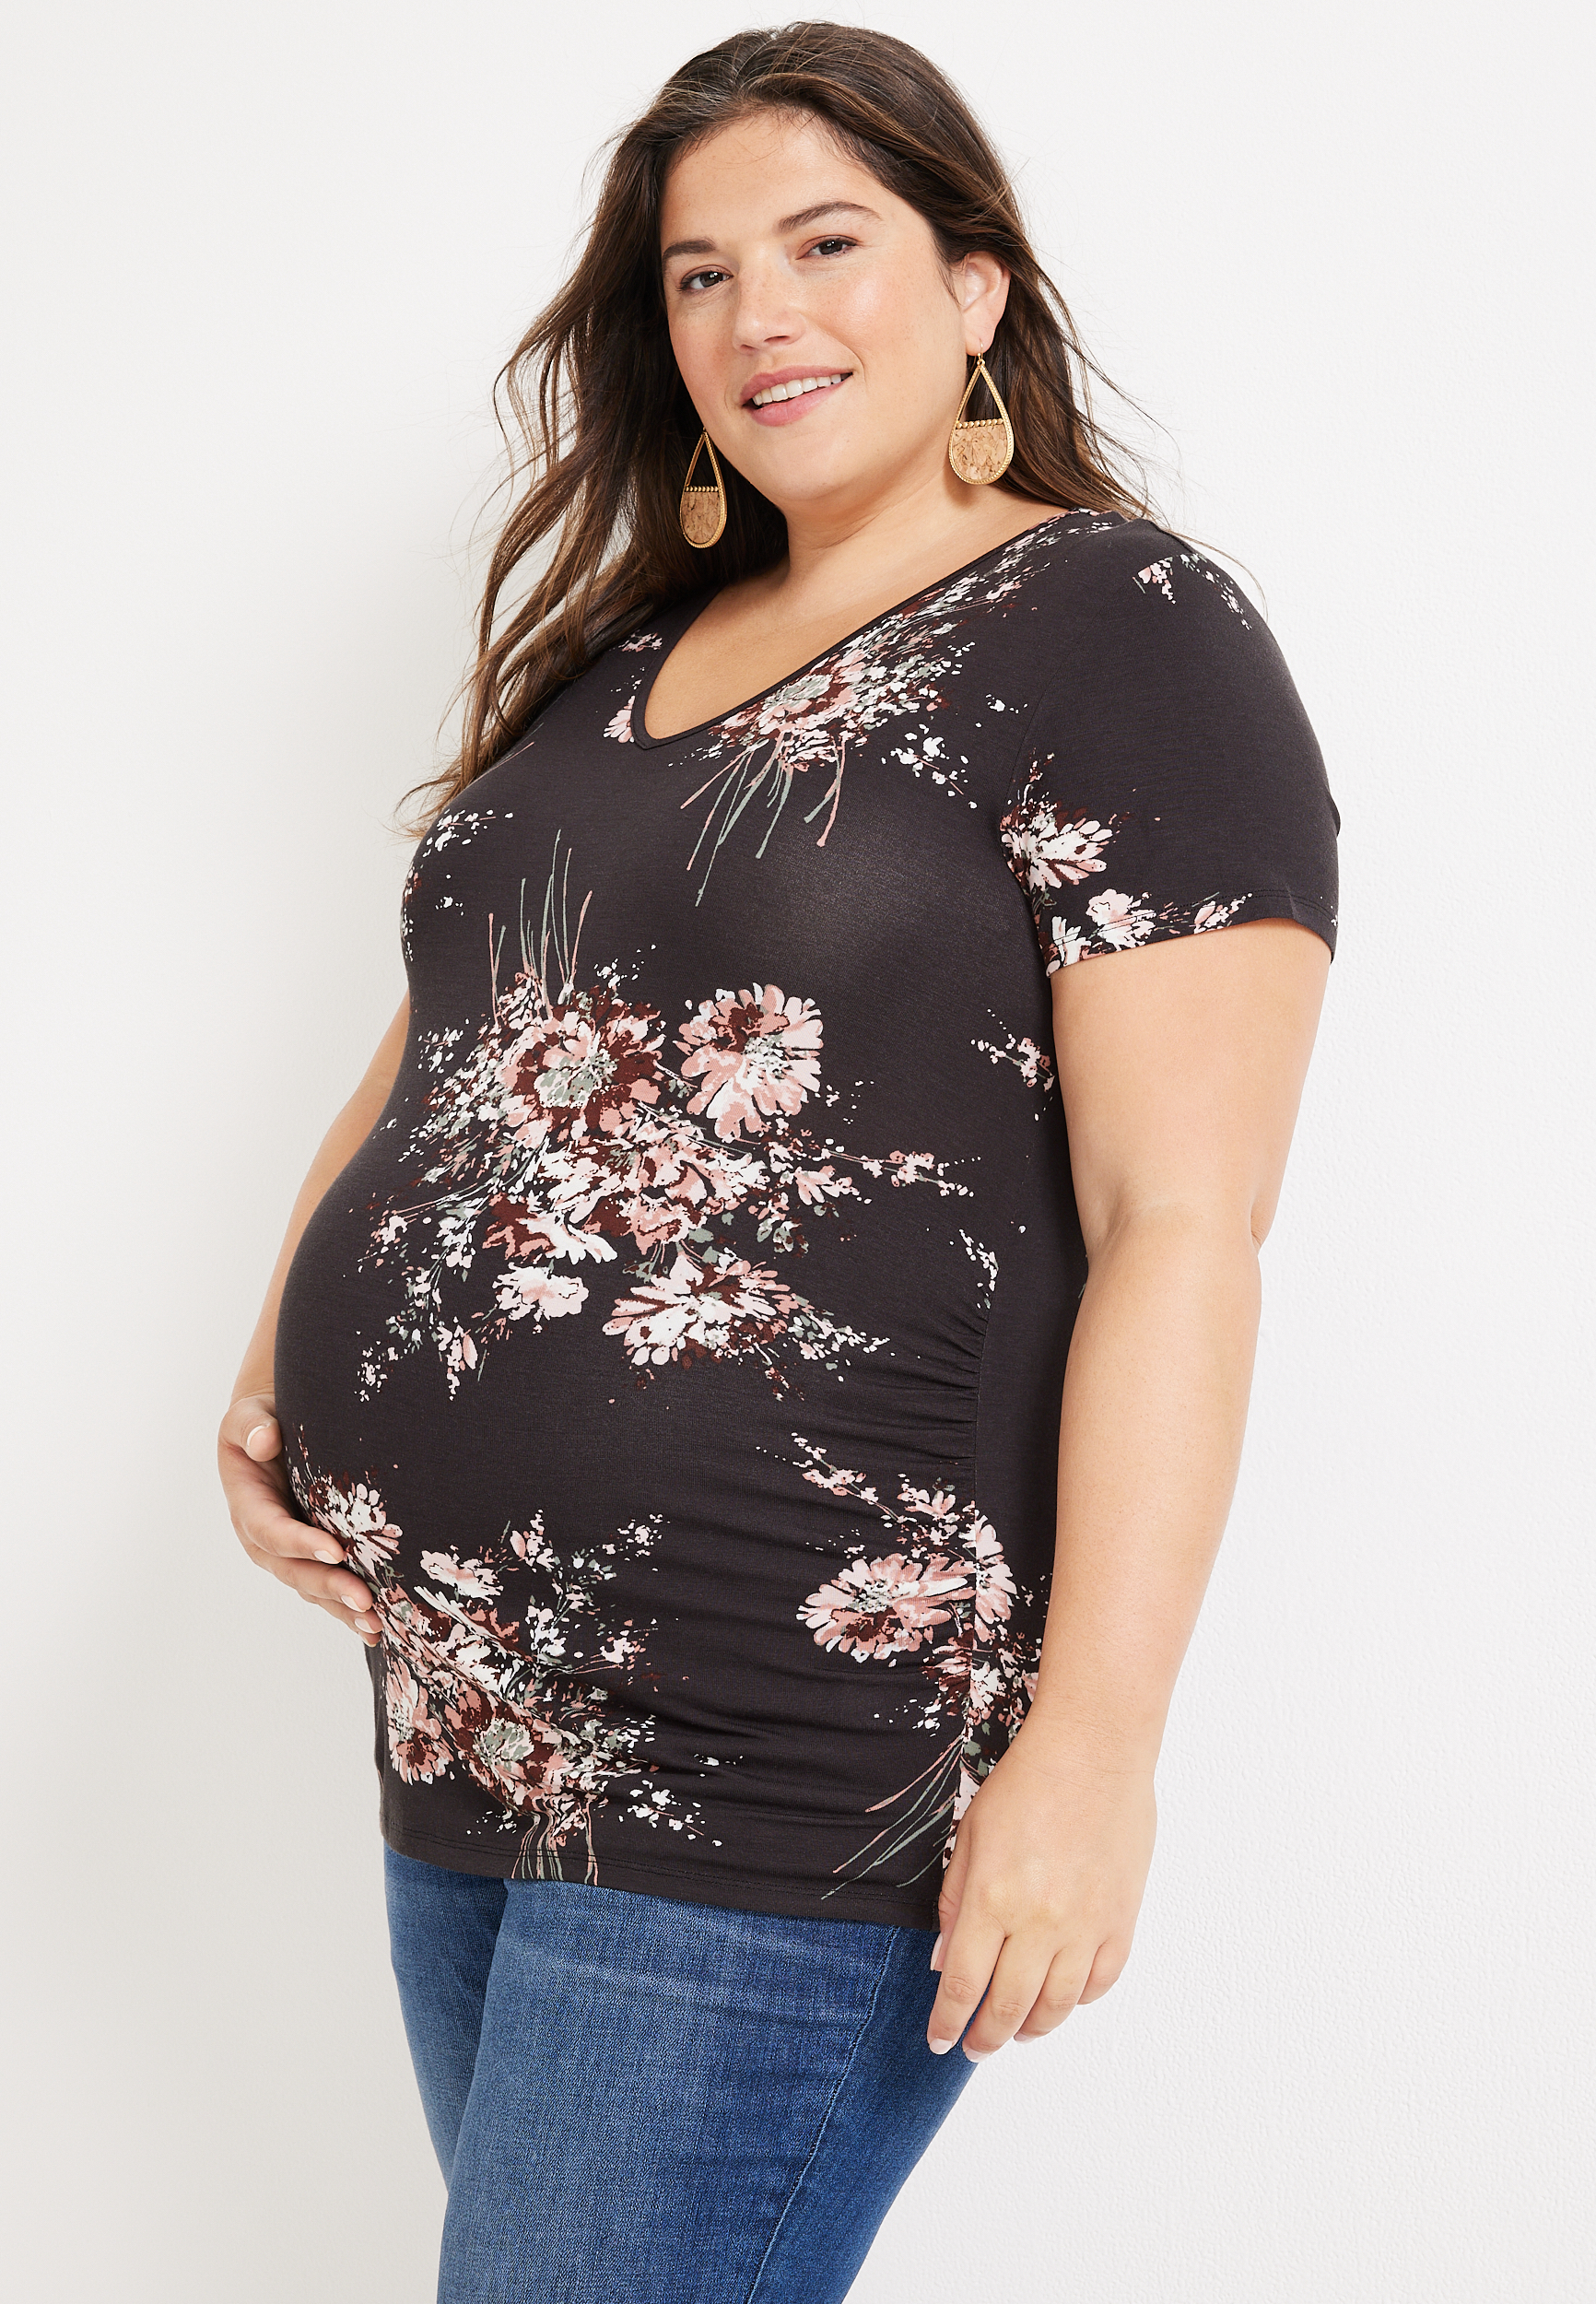  Plus Size Maternity Tops